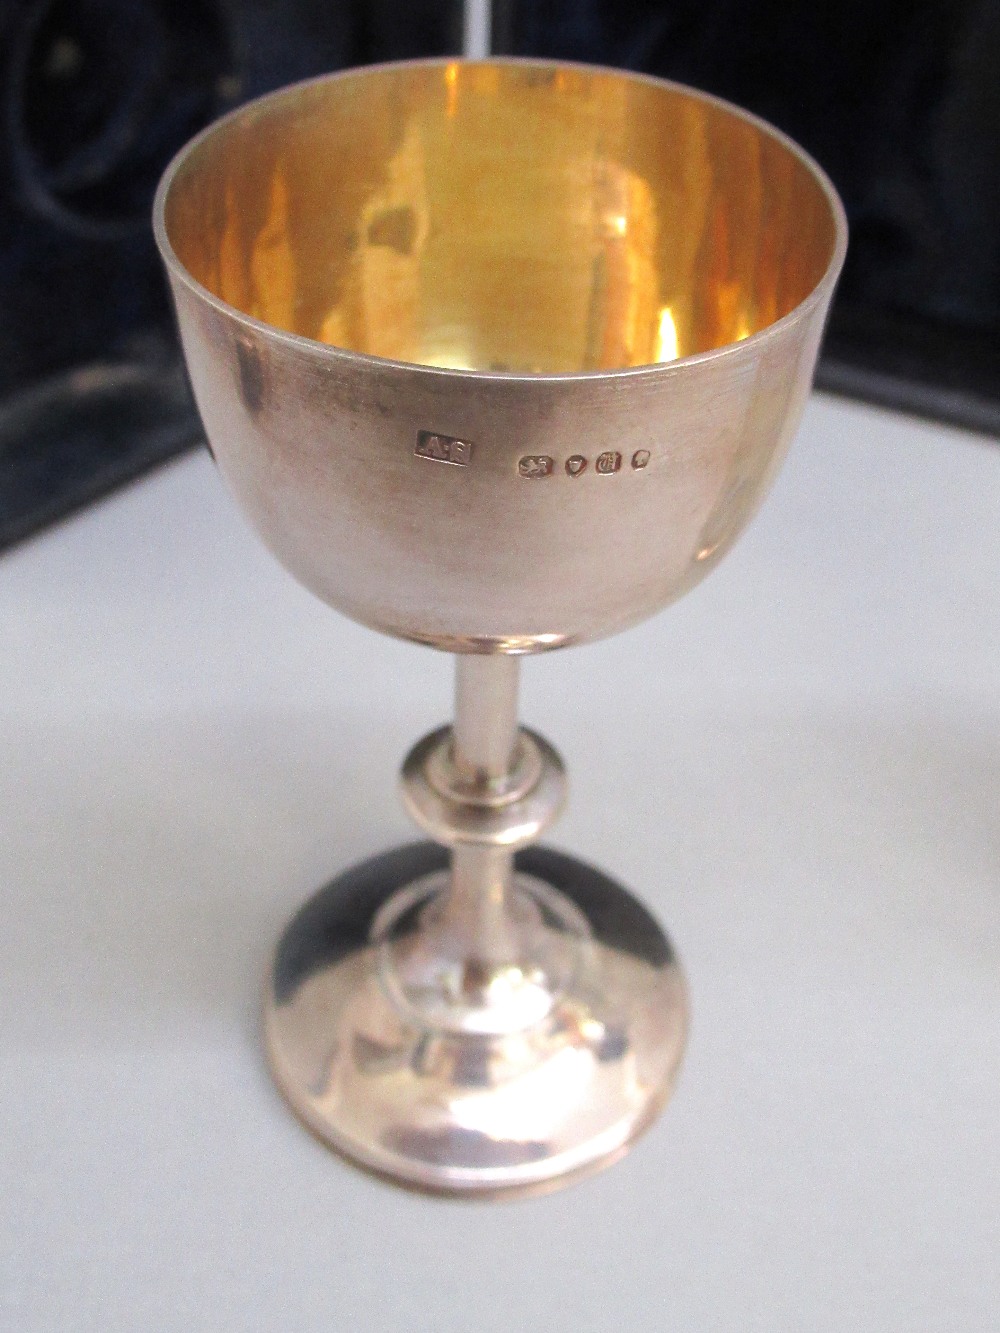 VICTORIAN SILVER TRAVELLING COMMUNION SET COMPRISING CHALLICE, PATEN AND WINE BOTTLE, ENGRAVED - Image 4 of 6